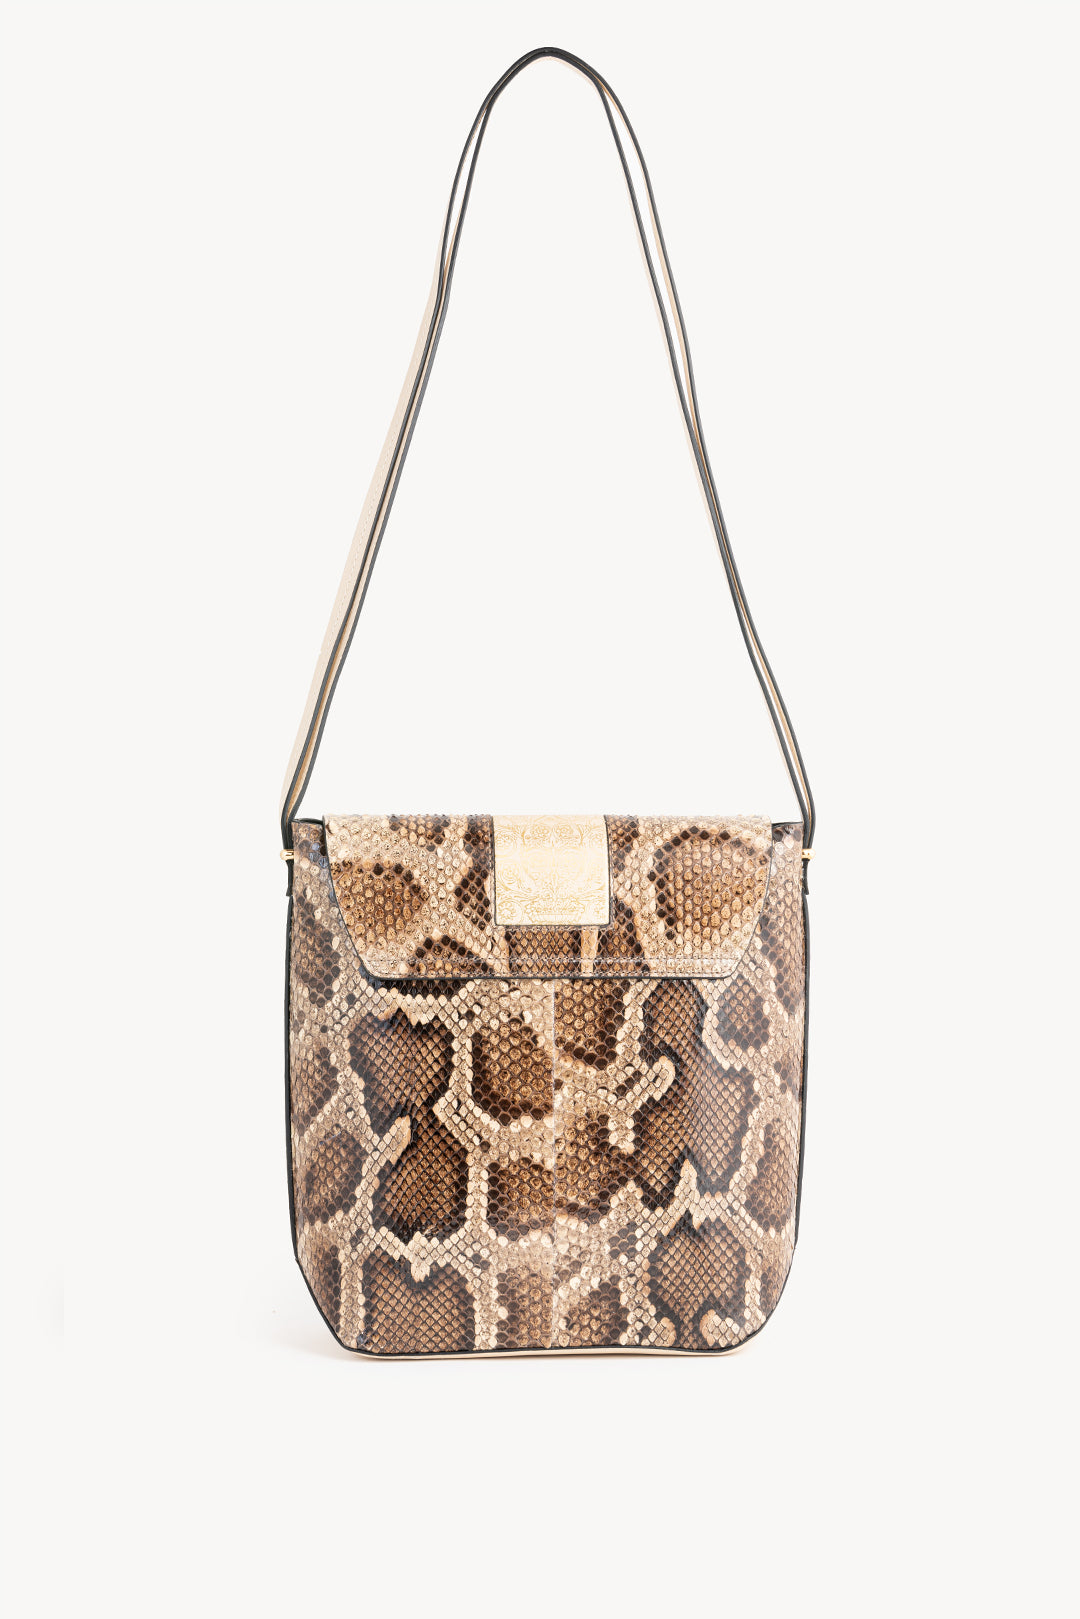 Crossbody in fine python leather and Calf - Brown and Beige